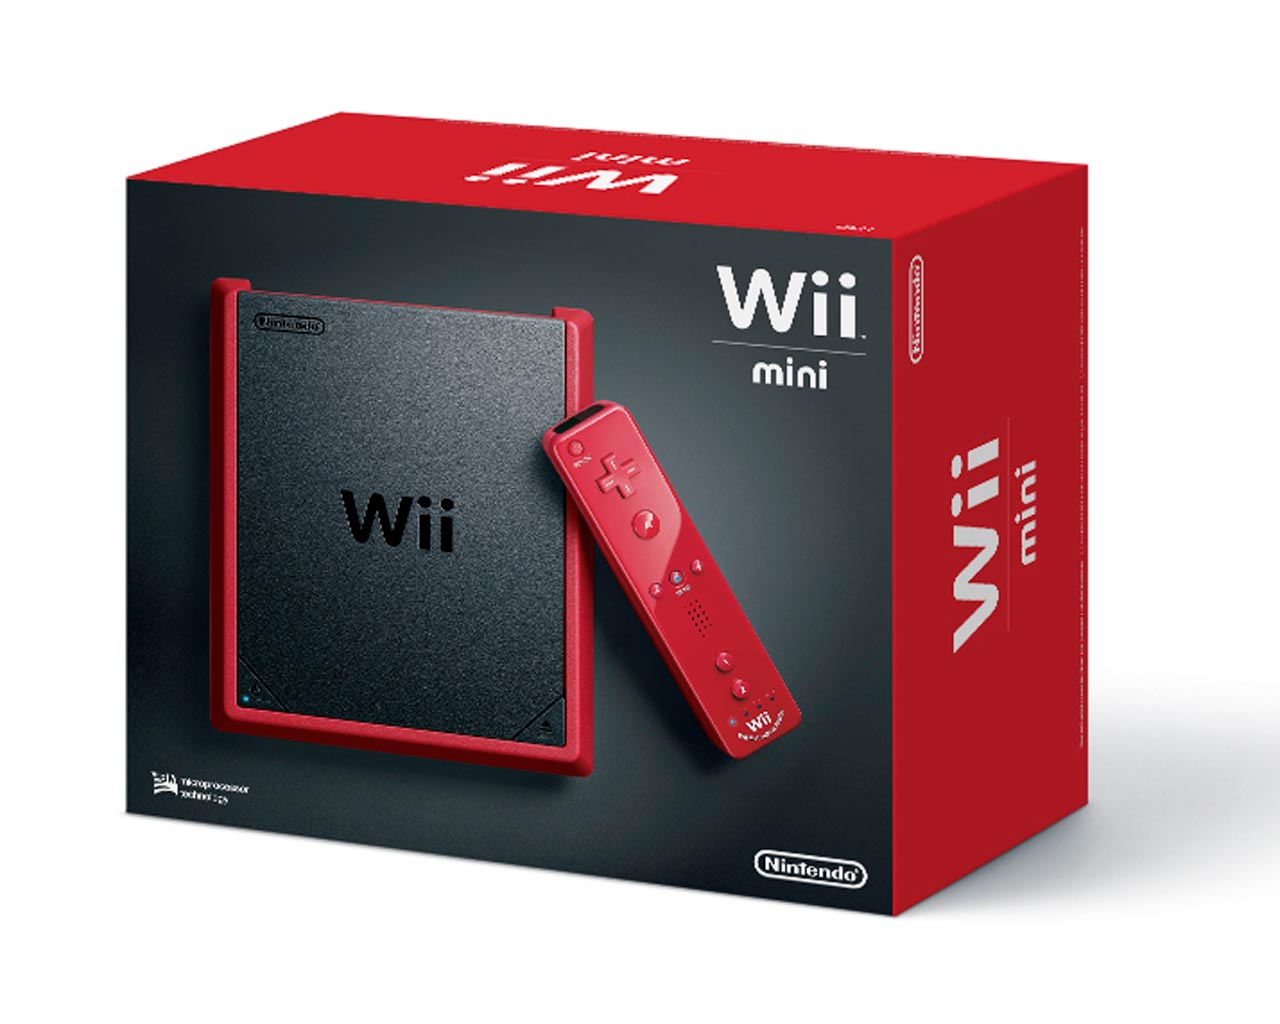 NA PR: Wii mini Offers Big Value This Holiday Season